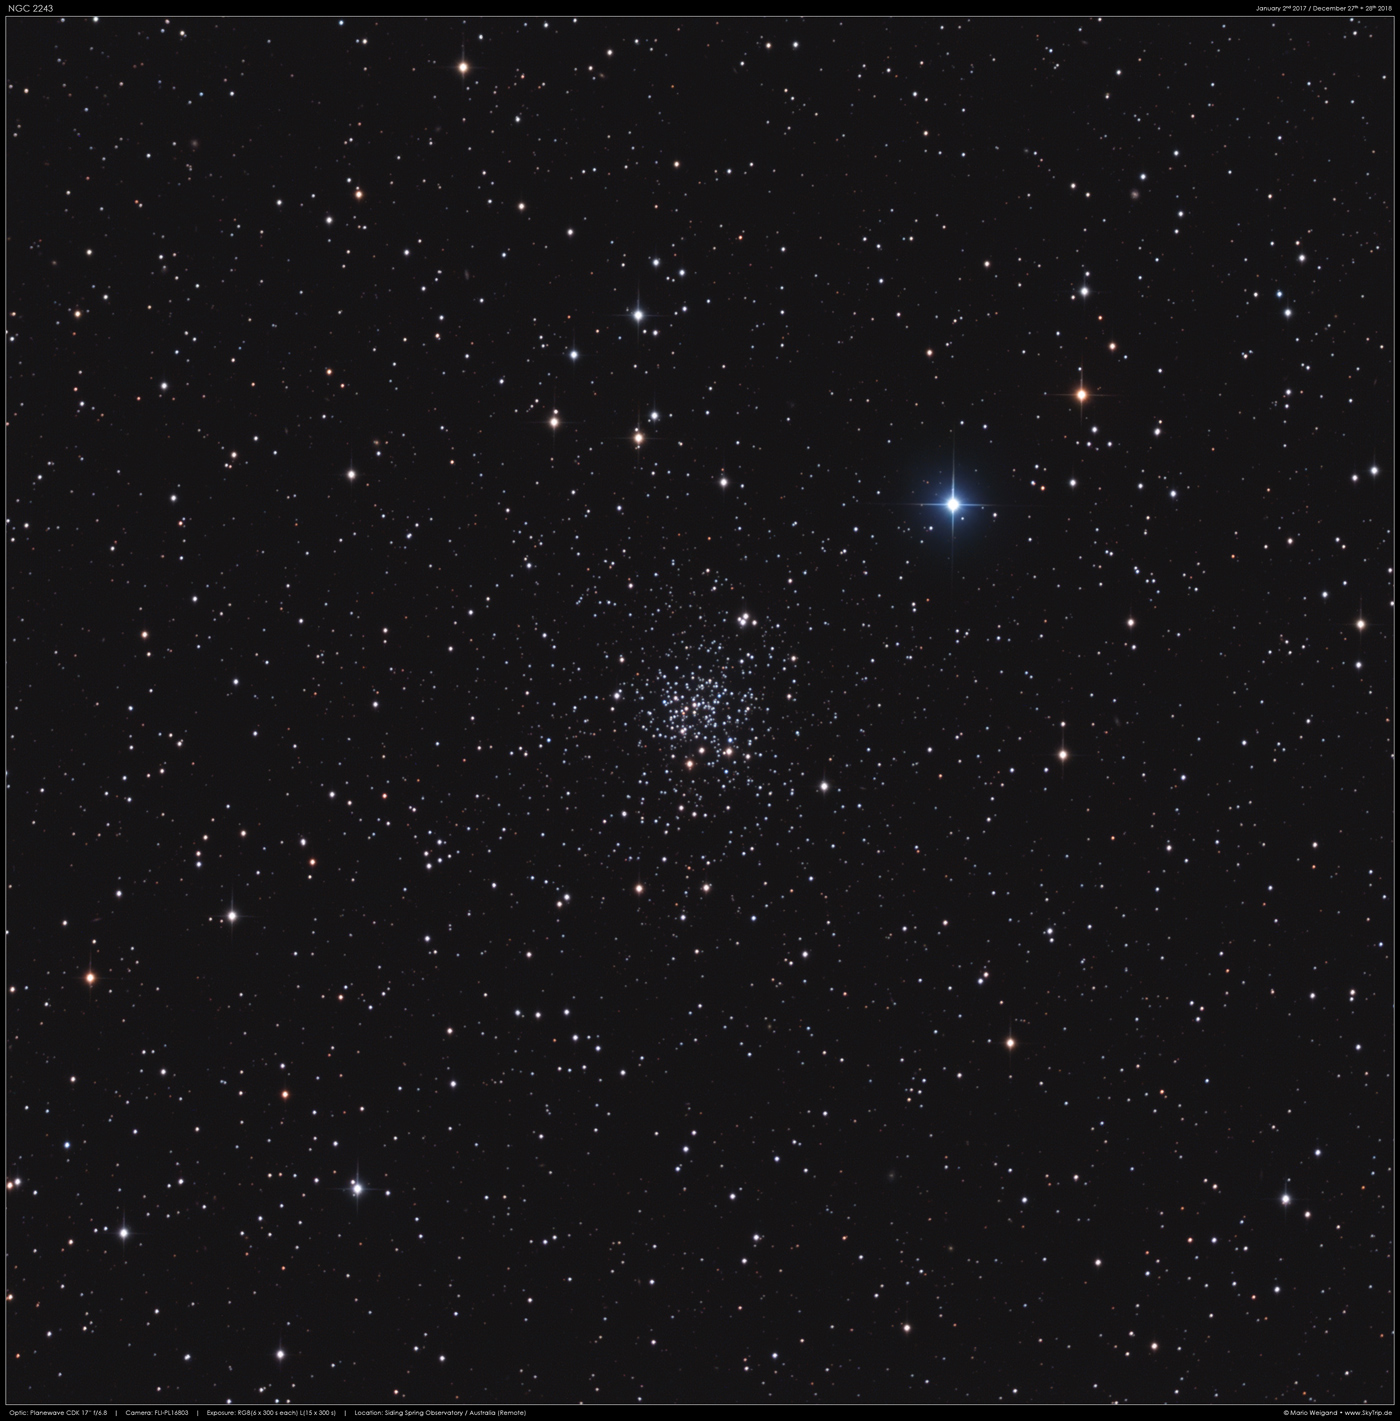 NGC 2243 in Canis Major